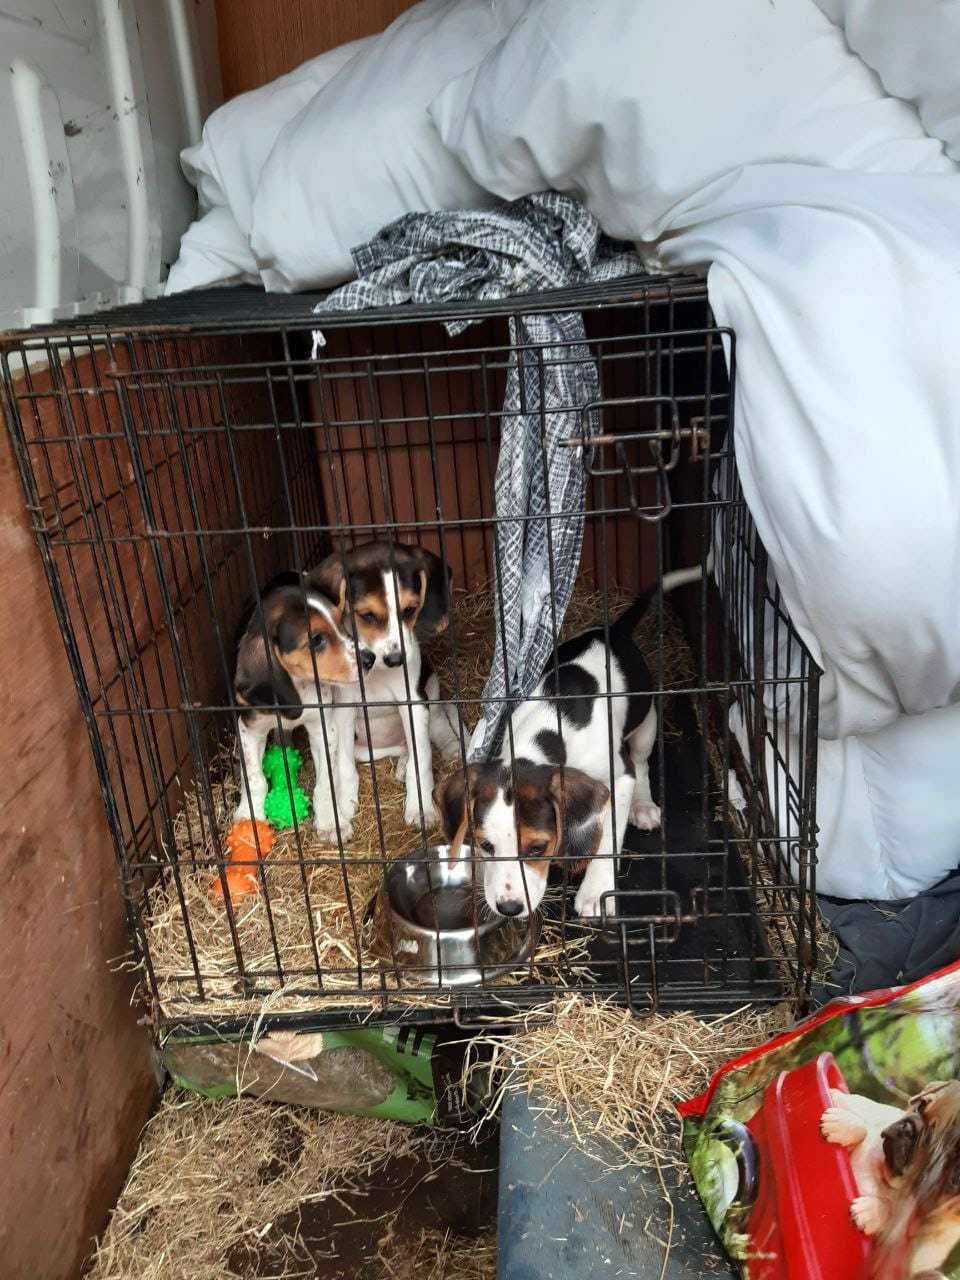 The pups were found in small cages inside the cluttered van.